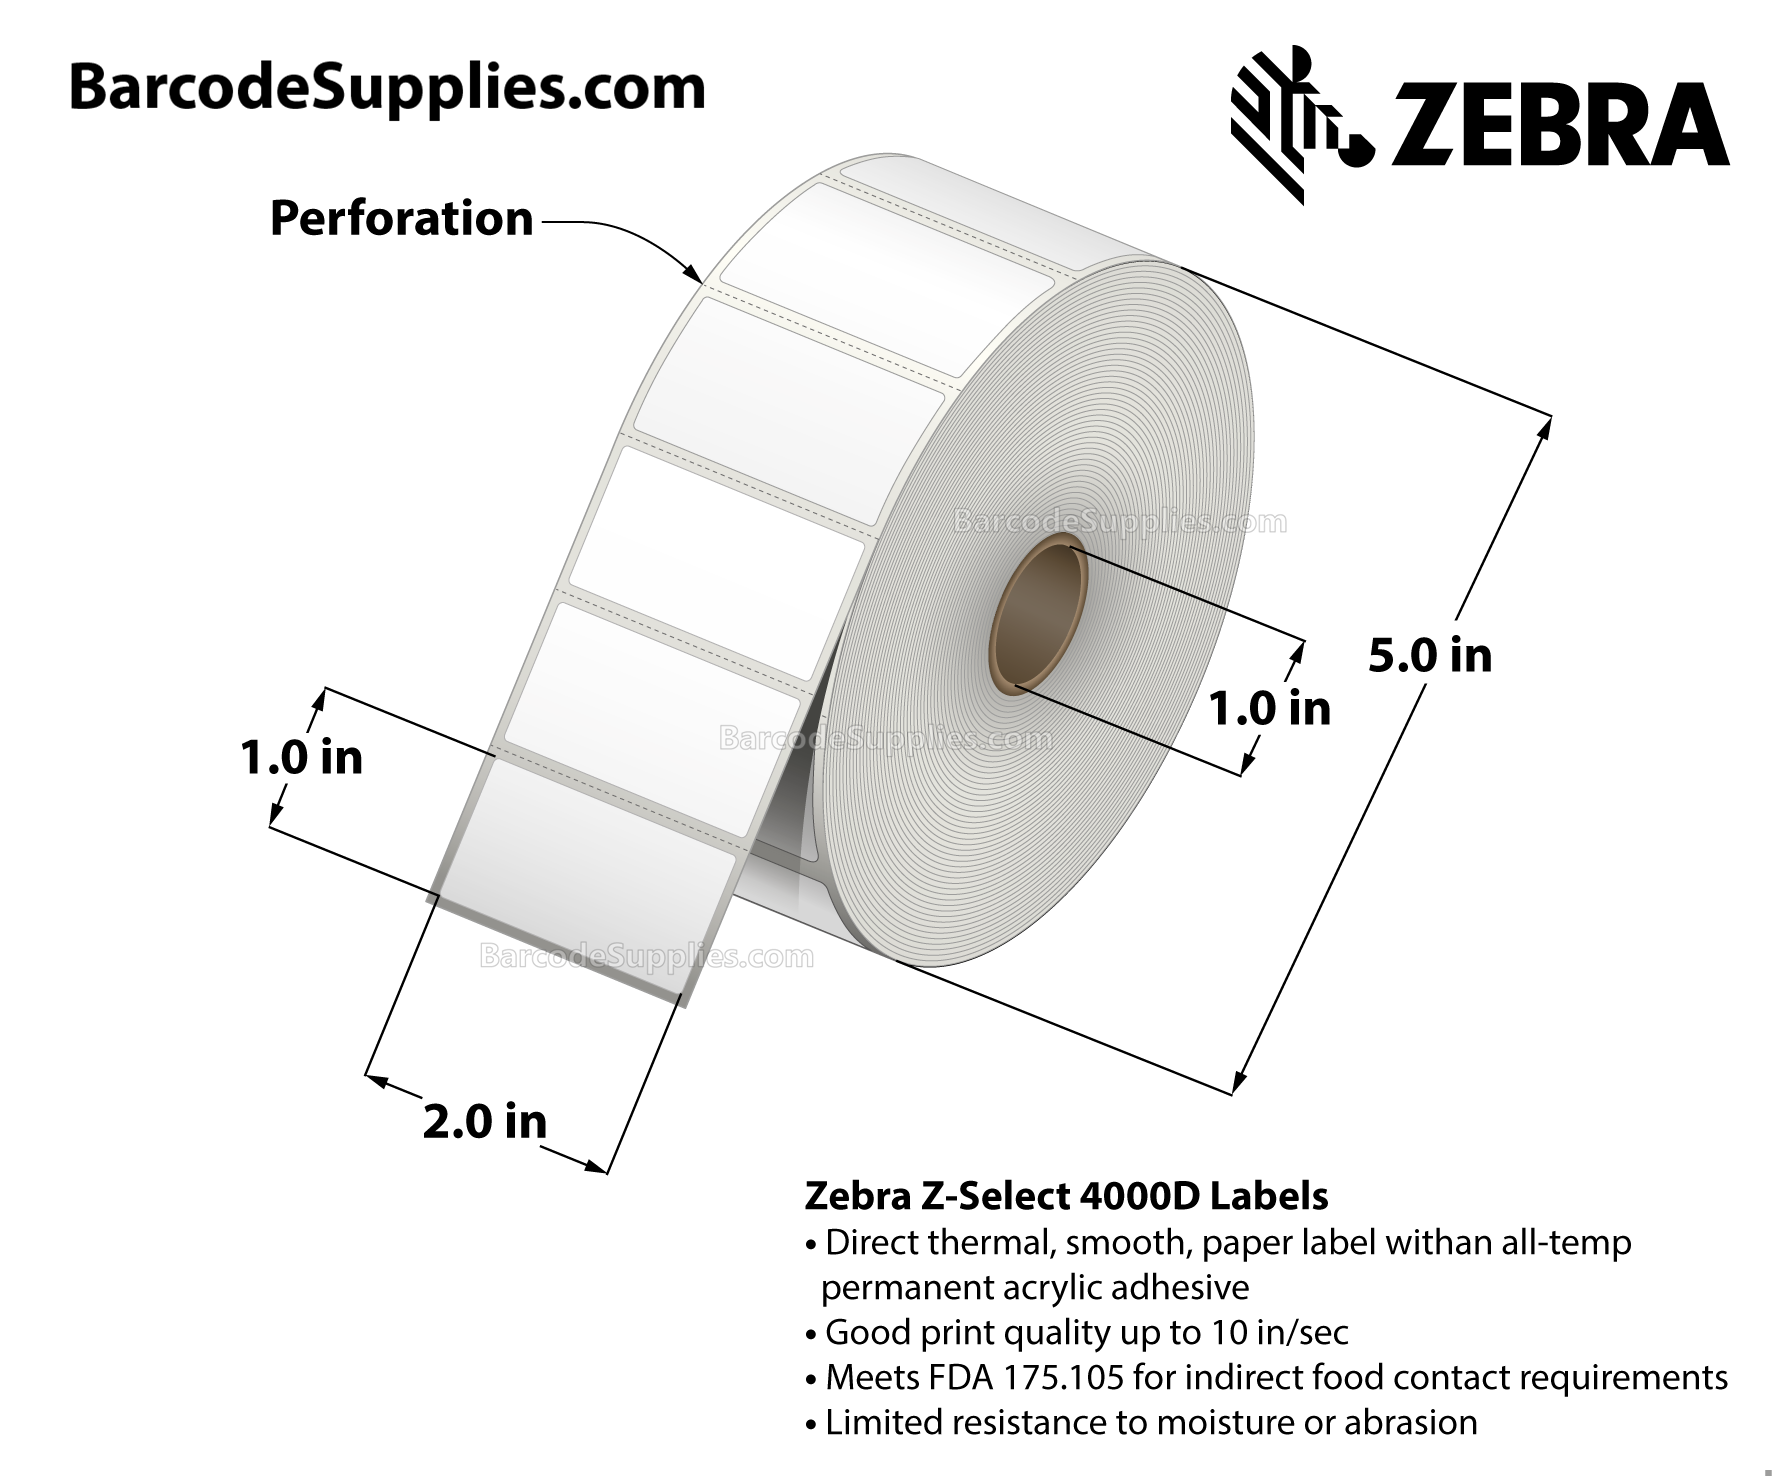 2 x 1 Direct Thermal White Z-Select 4000D Labels With All-Temp Adhesive - Perforated - 2340 Labels Per Roll - Carton Of 4 Rolls - 9360 Labels Total - MPN: 10010039